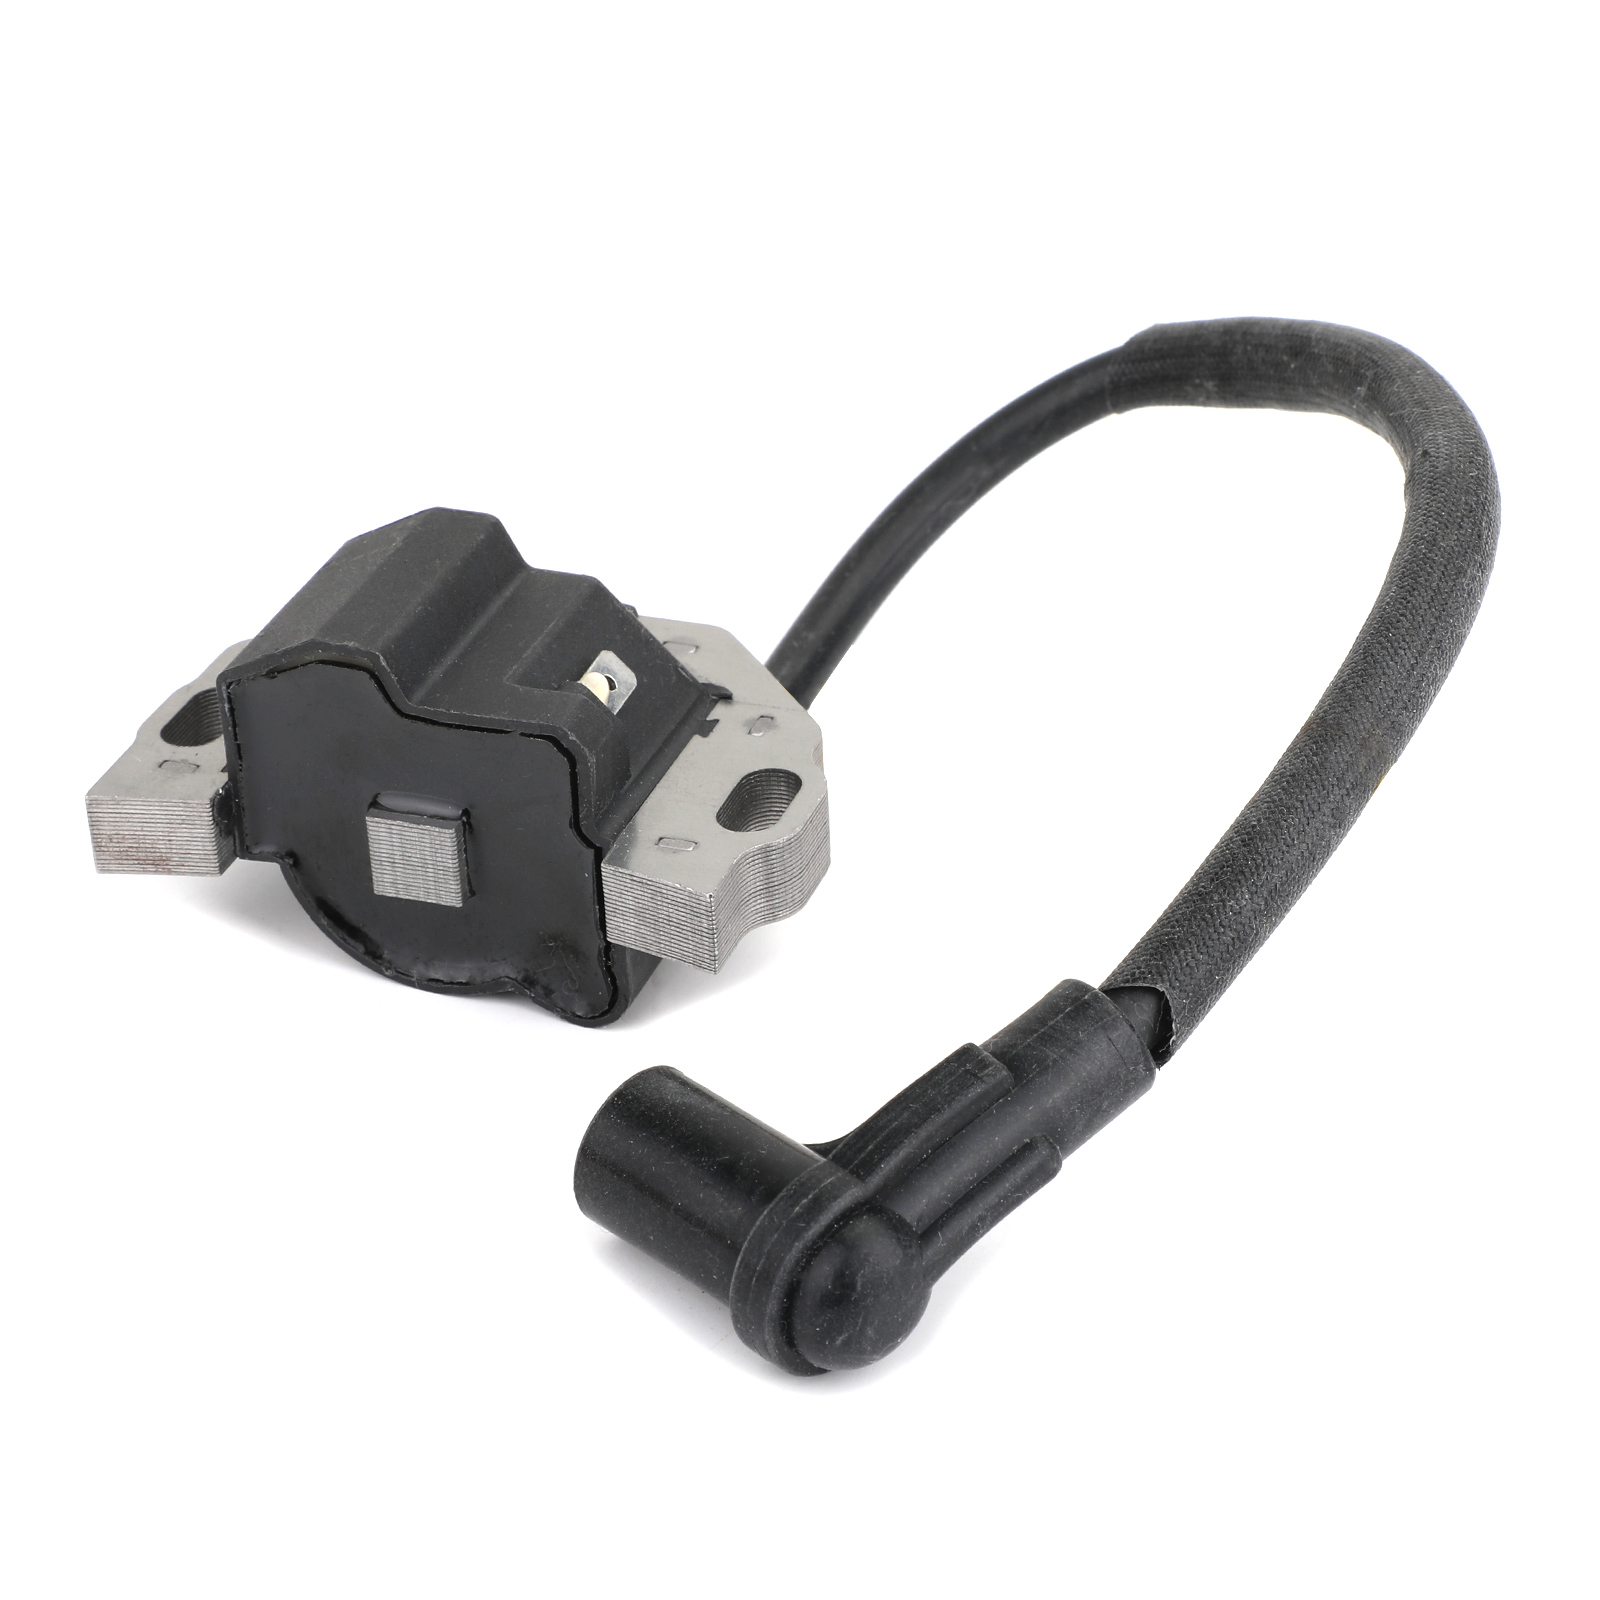 Motor Genic Ignition Coil Fit For Kawasaki 21171-0745 21171-0742 21171-7039 ZF-IG-A00135 - image 5 of 9